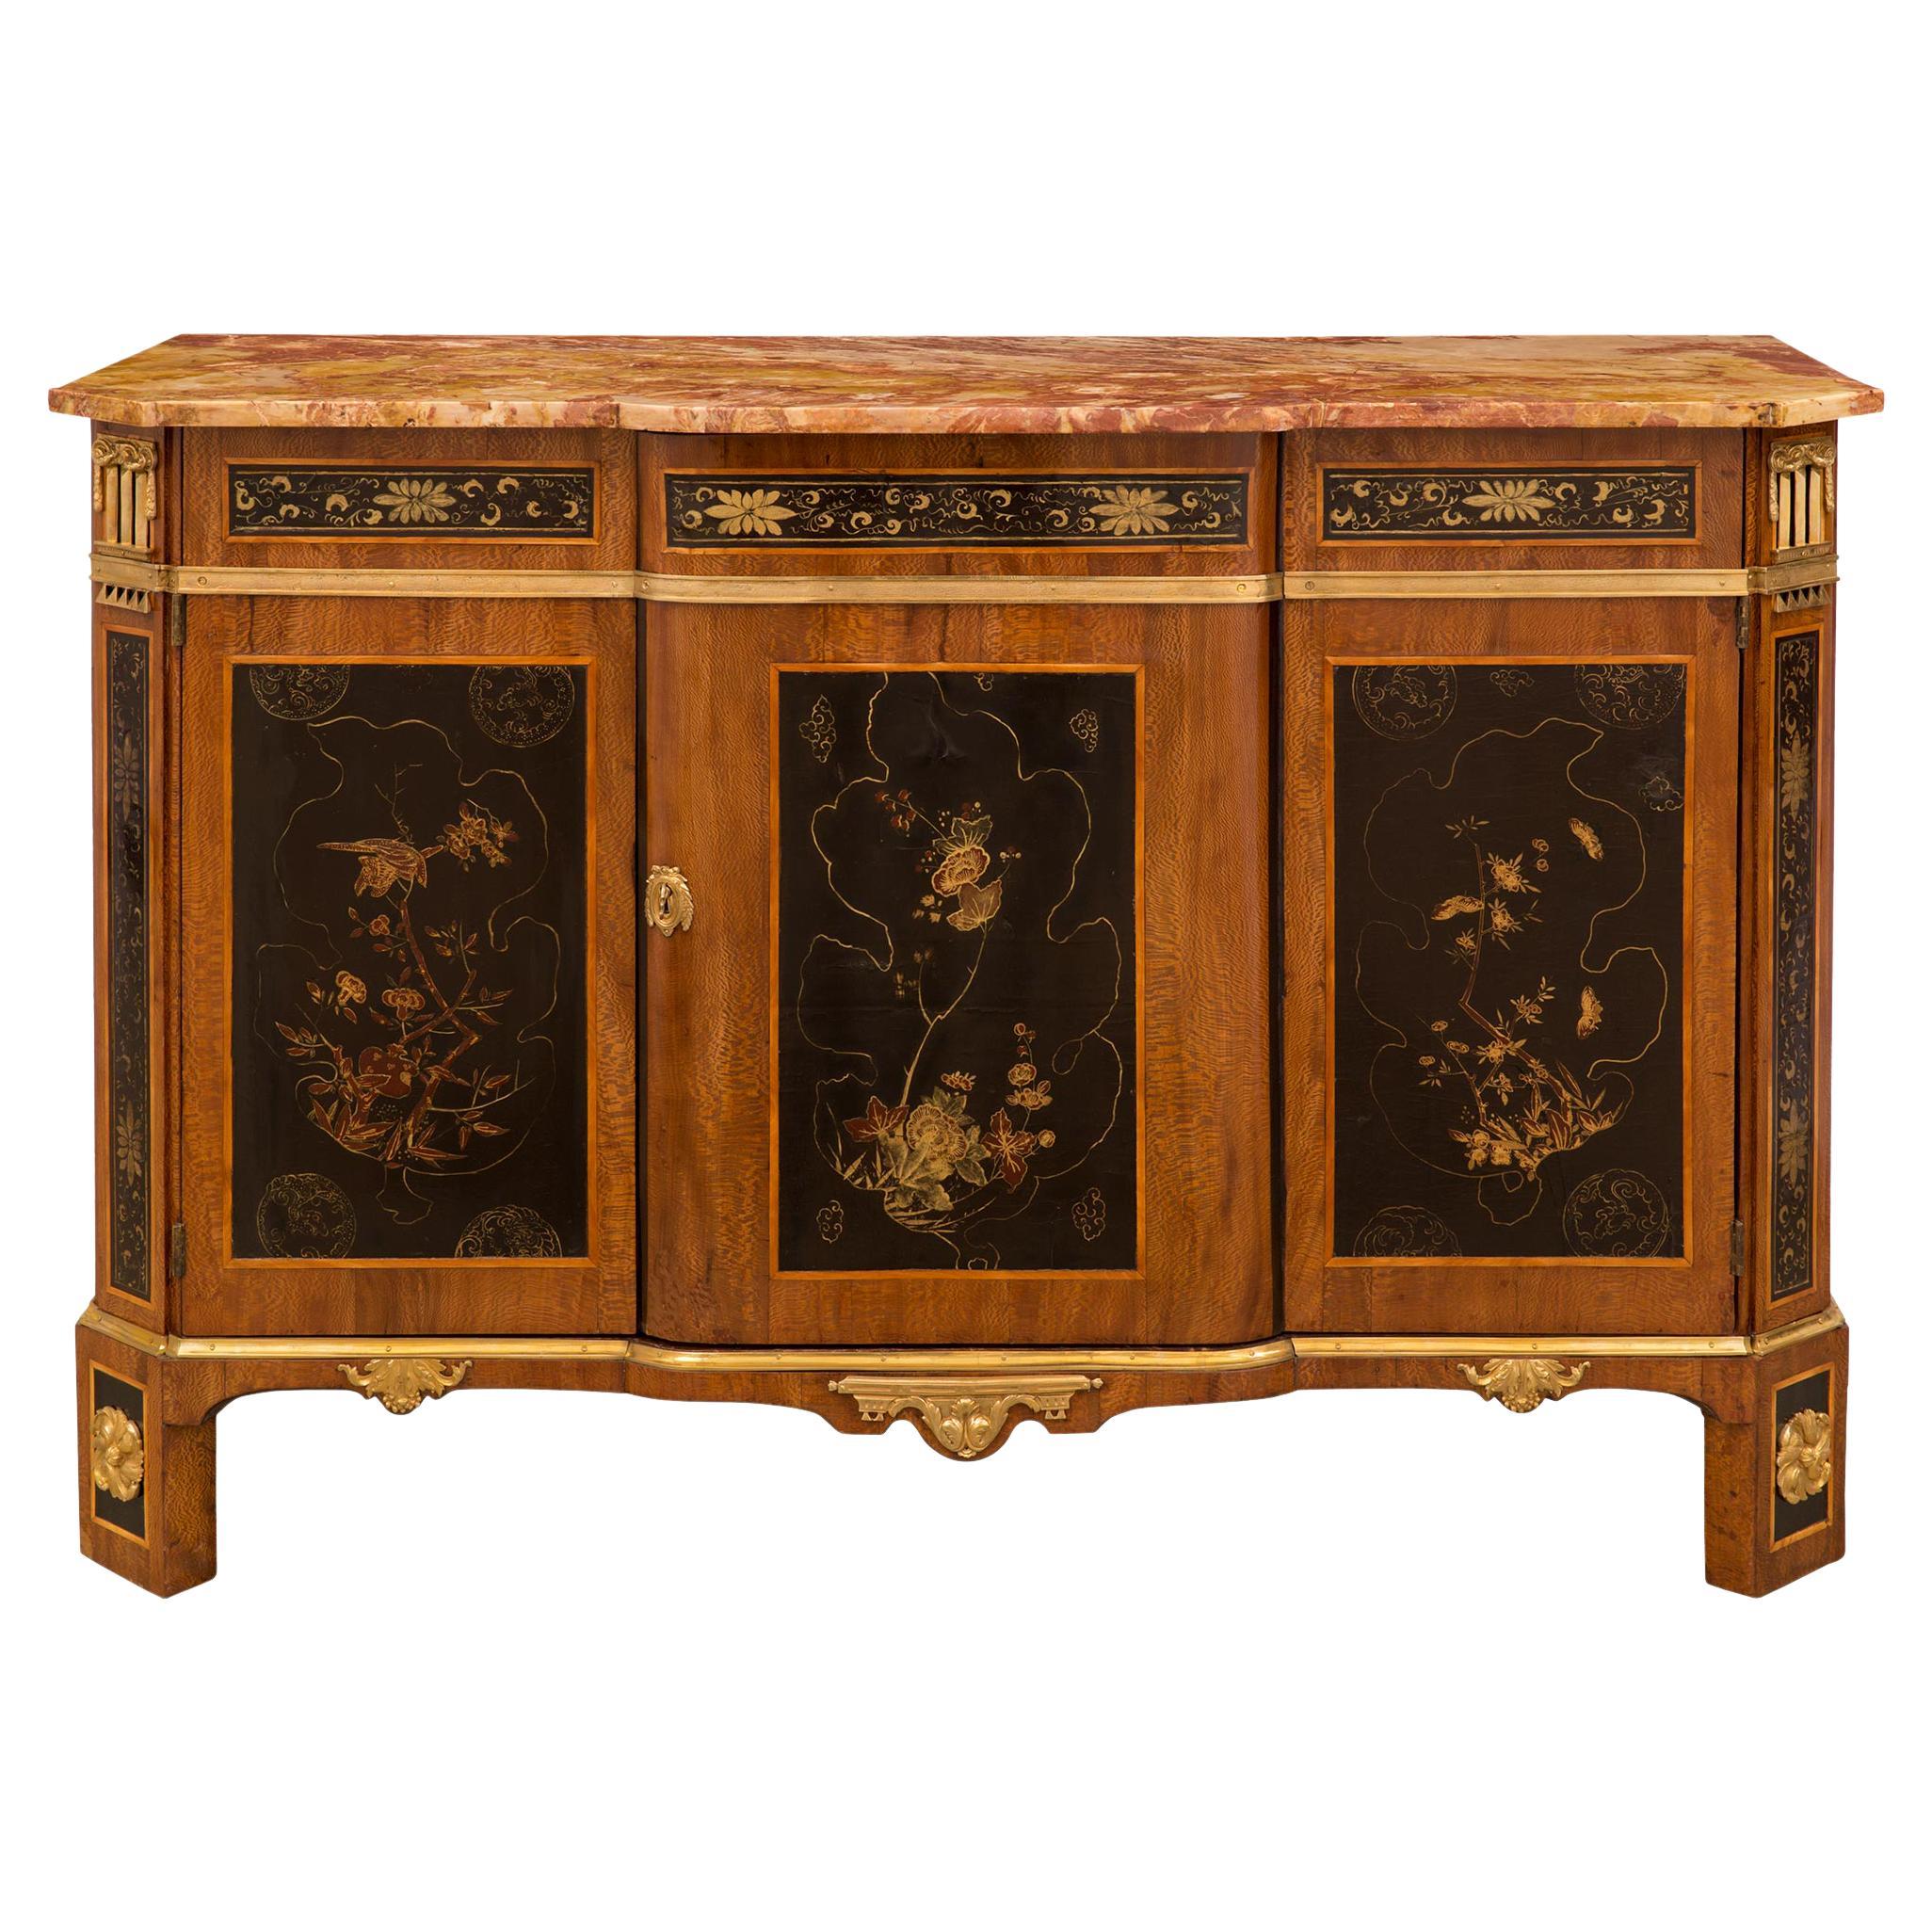 Italian 18th Century Japanese Lacquer and Lace Wood Veneer Cabinet For Sale